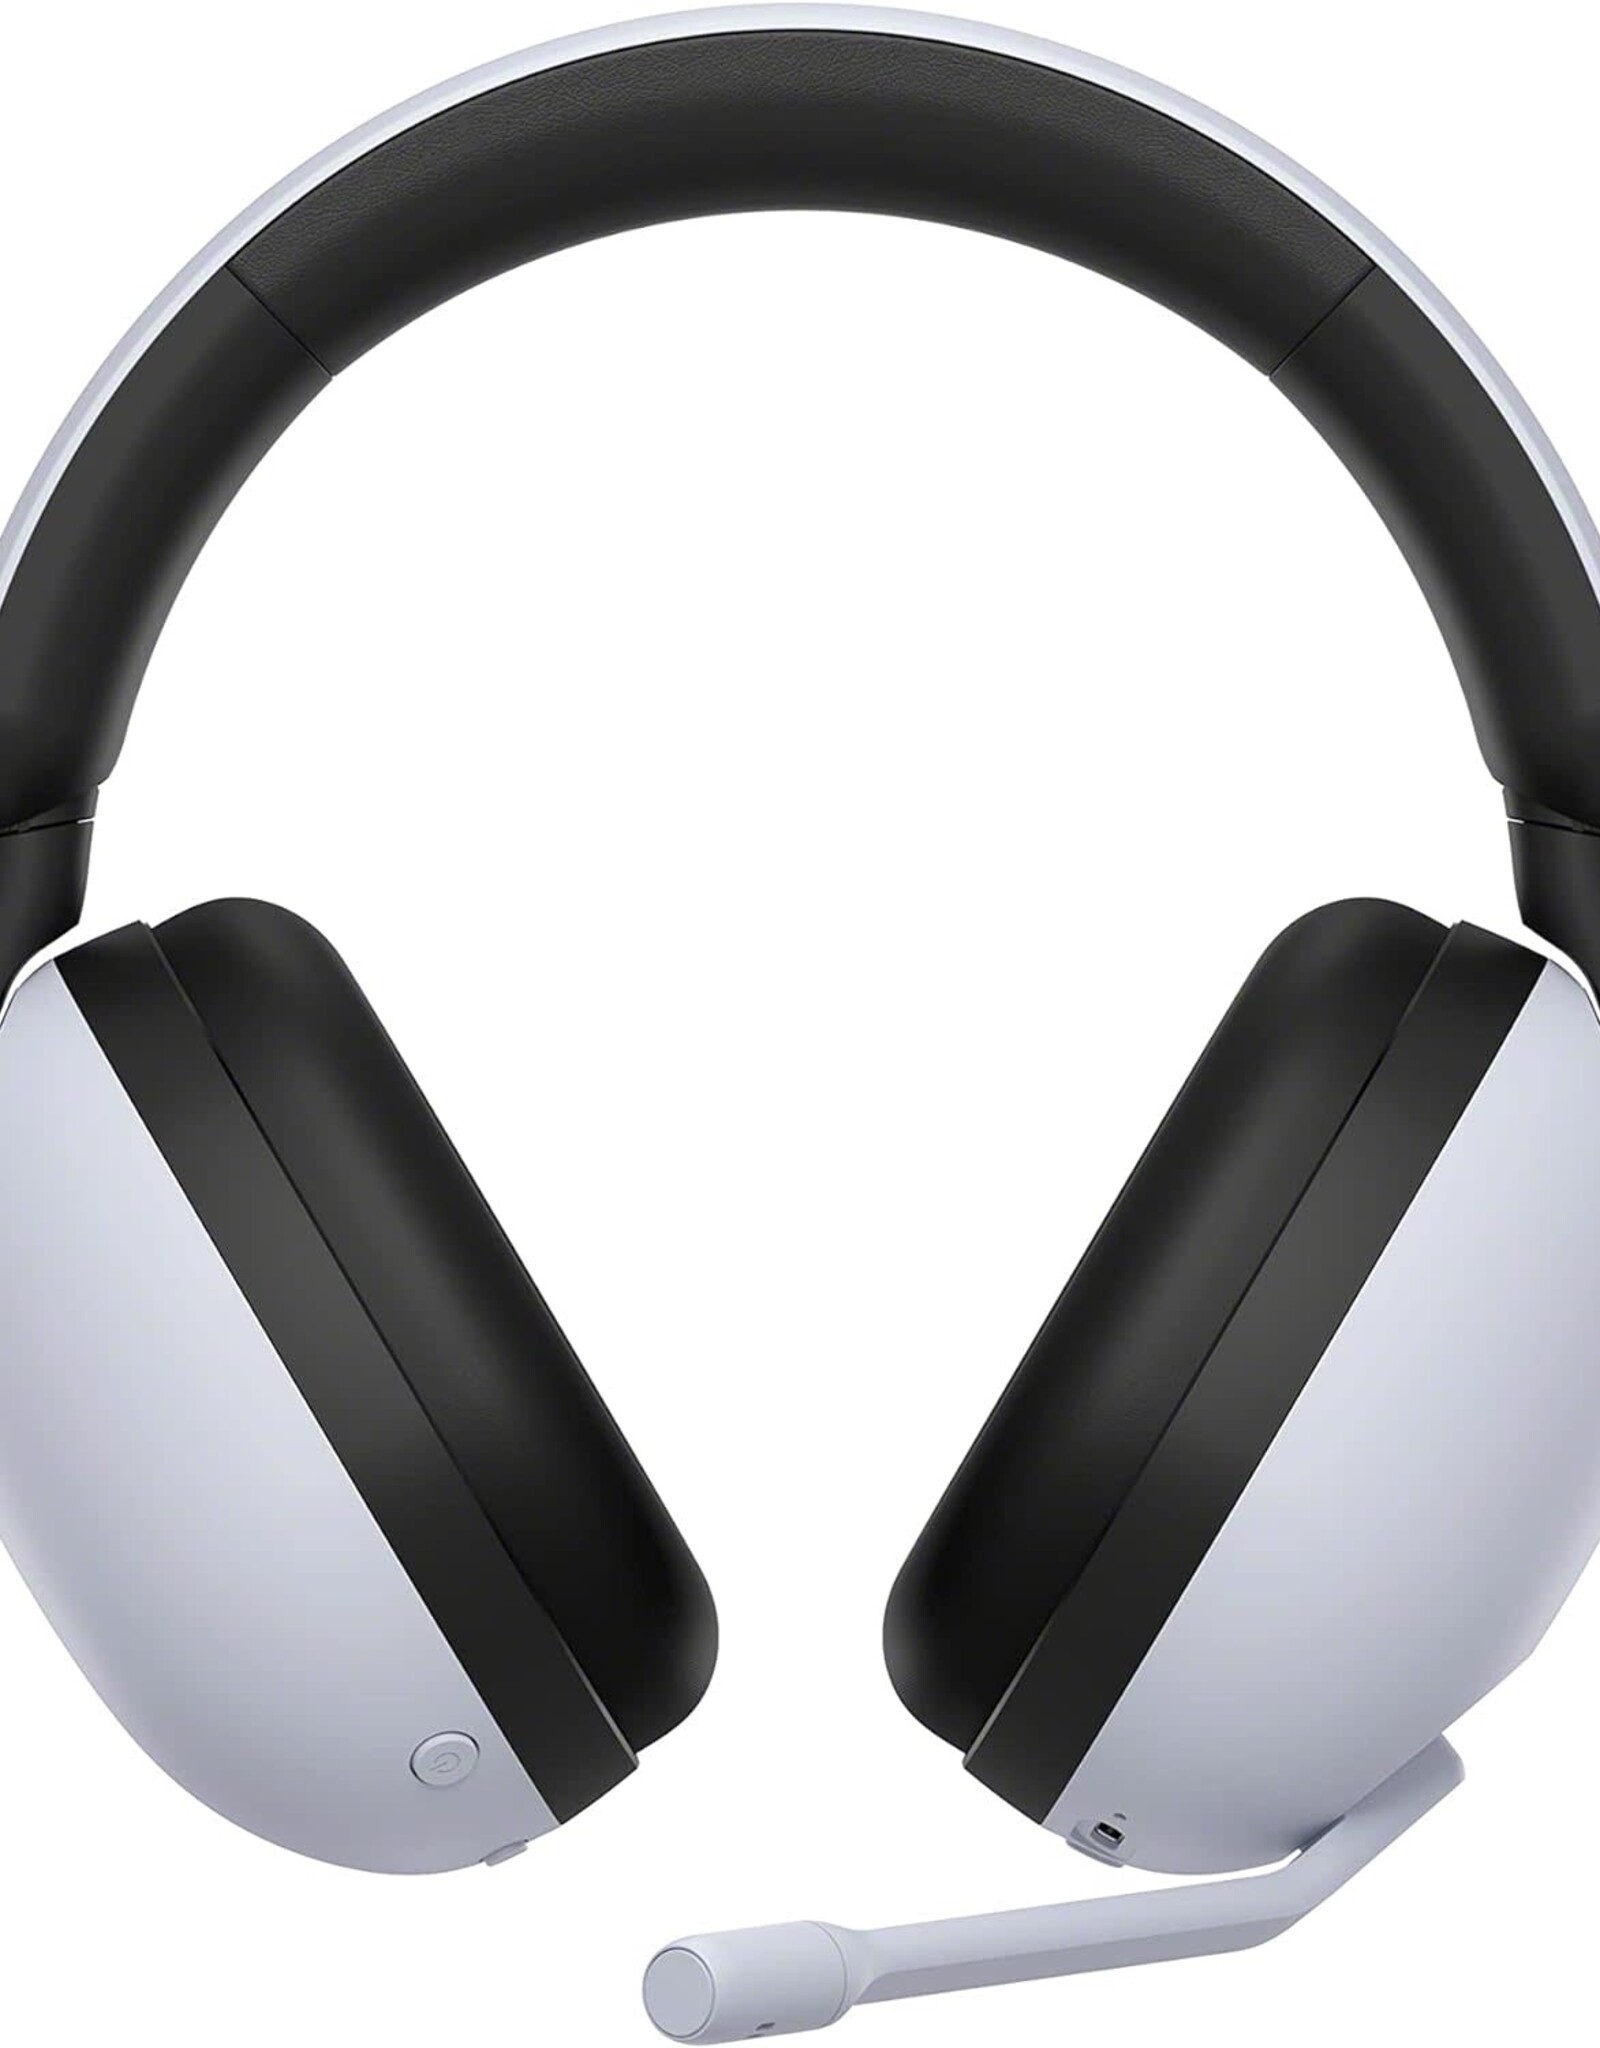 Sony-INZONE H7 Wireless Gaming Headset, Over-ear Headphones with 360 Spatial Sound, WH-G700,White